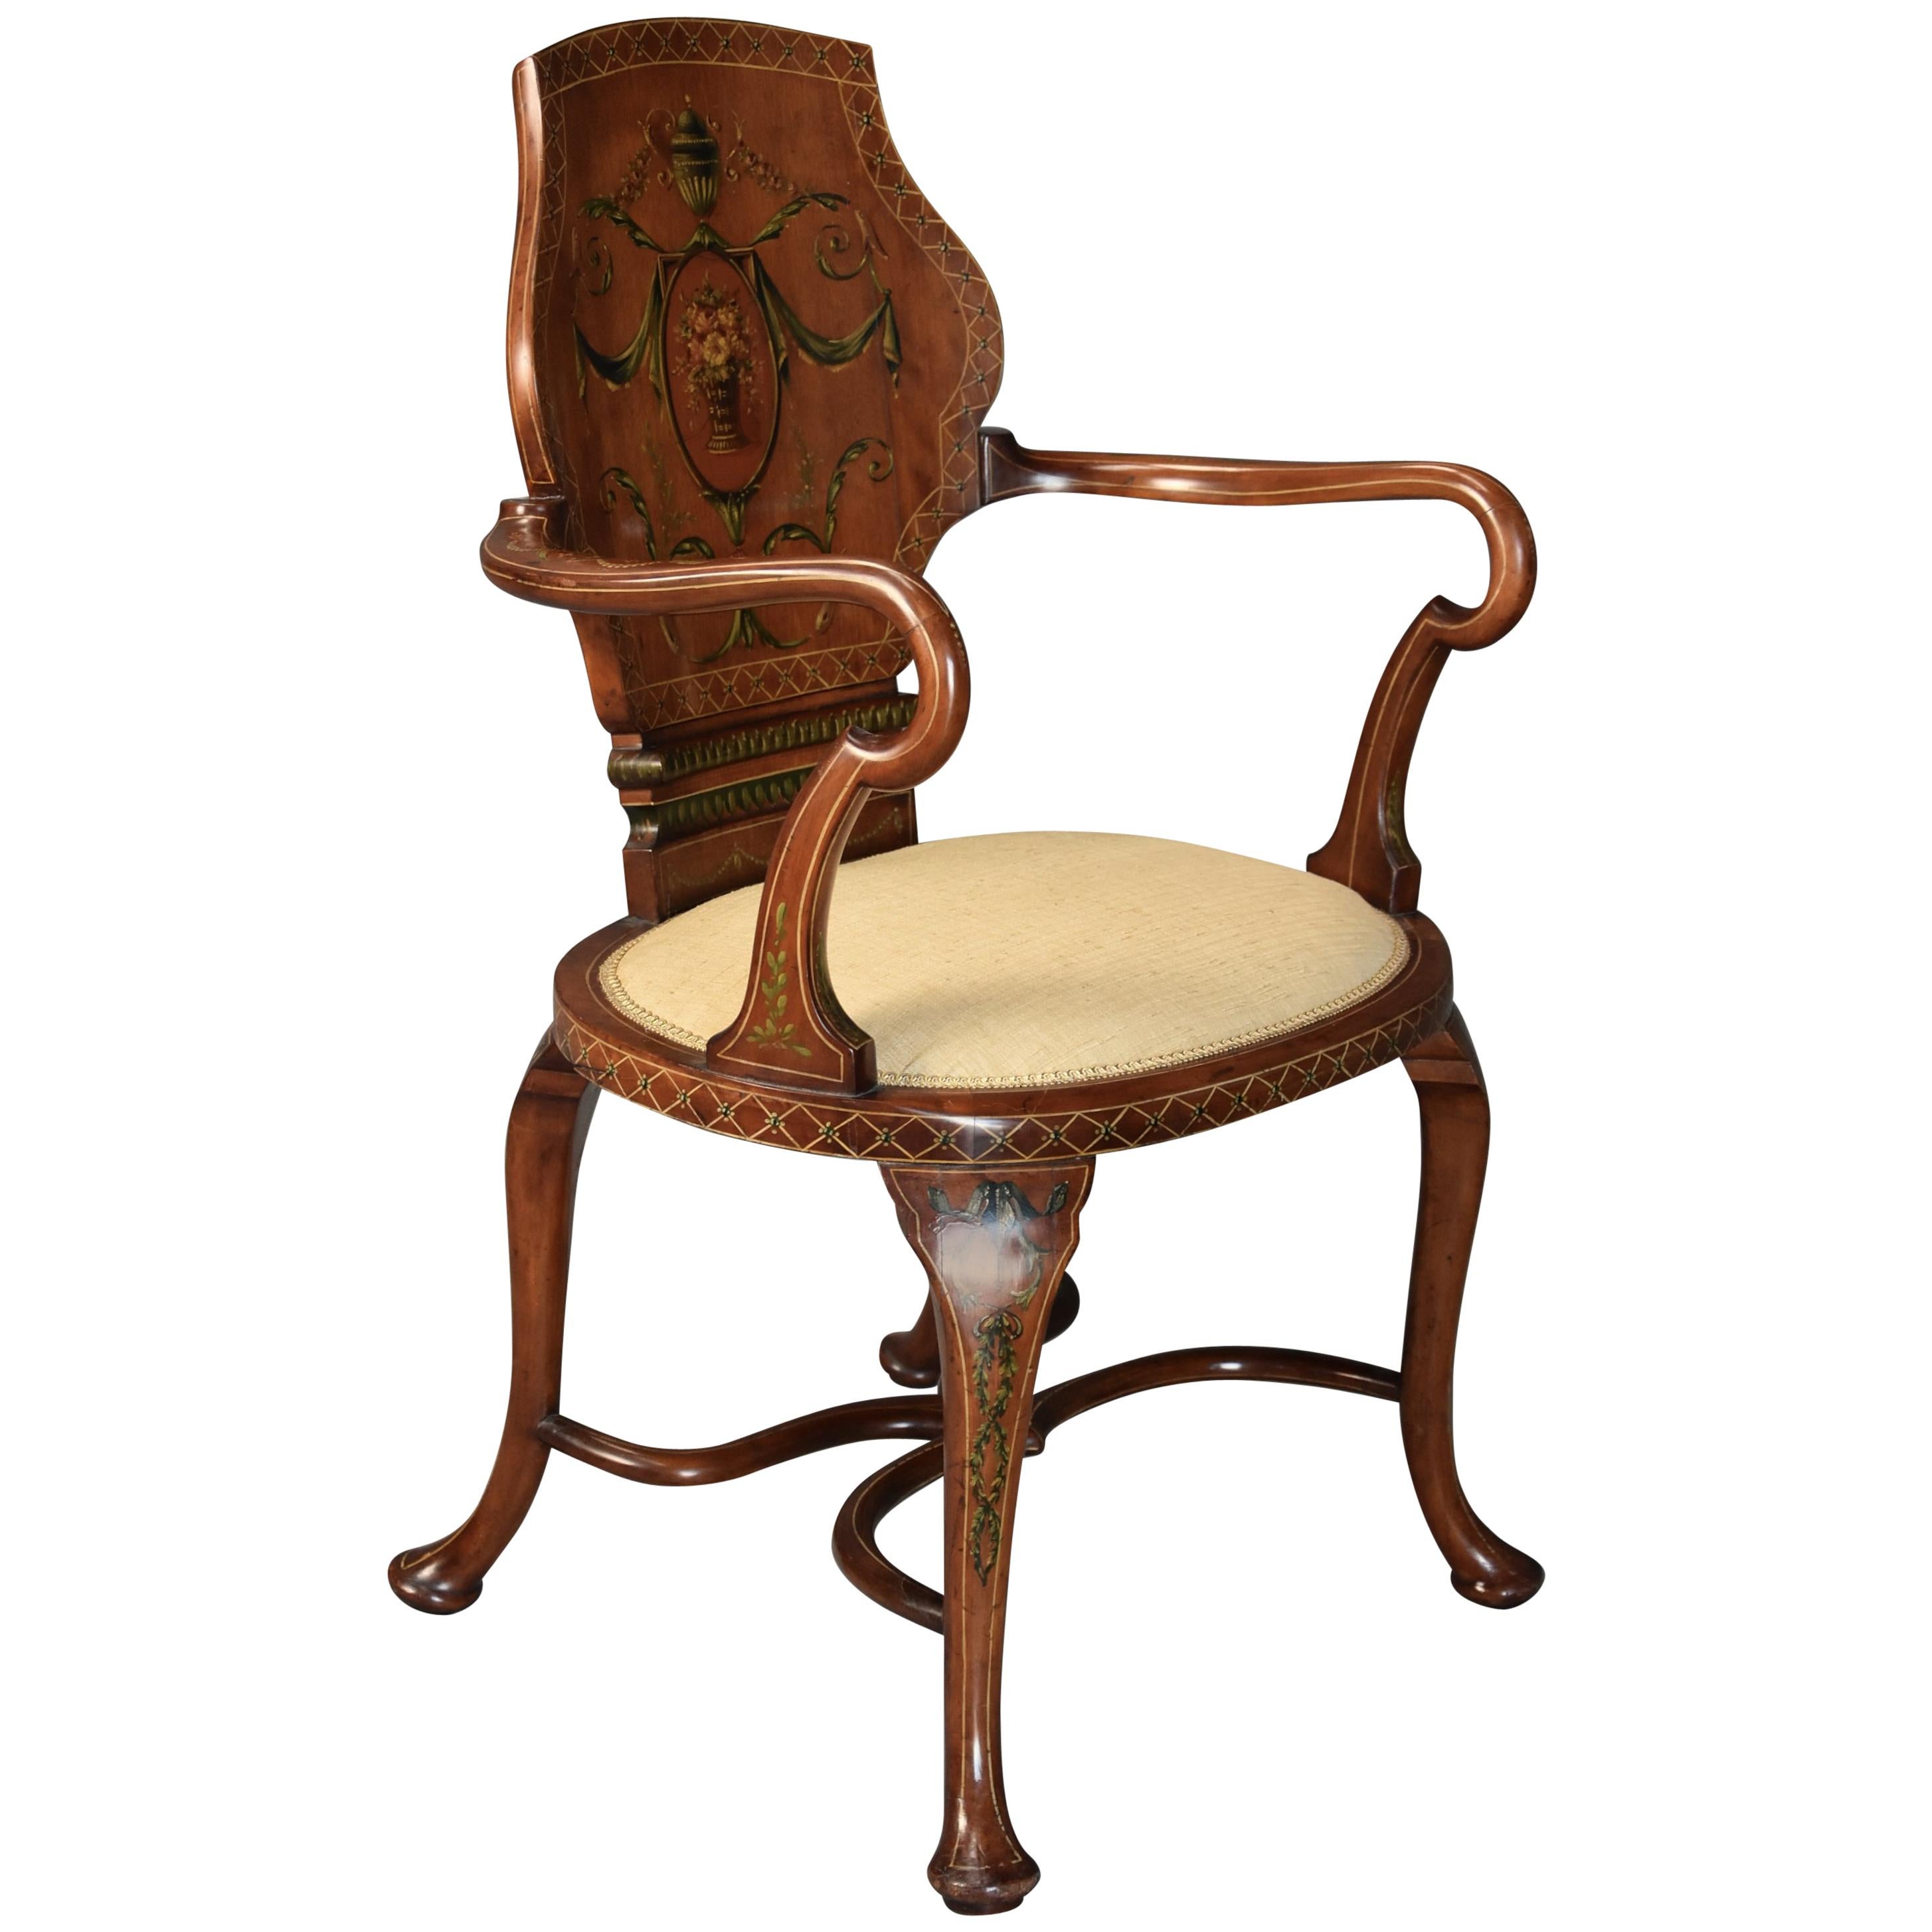 Highly Decorative Edwardian Satinwood and Painted Armchair in the Georgian Style im Angebot